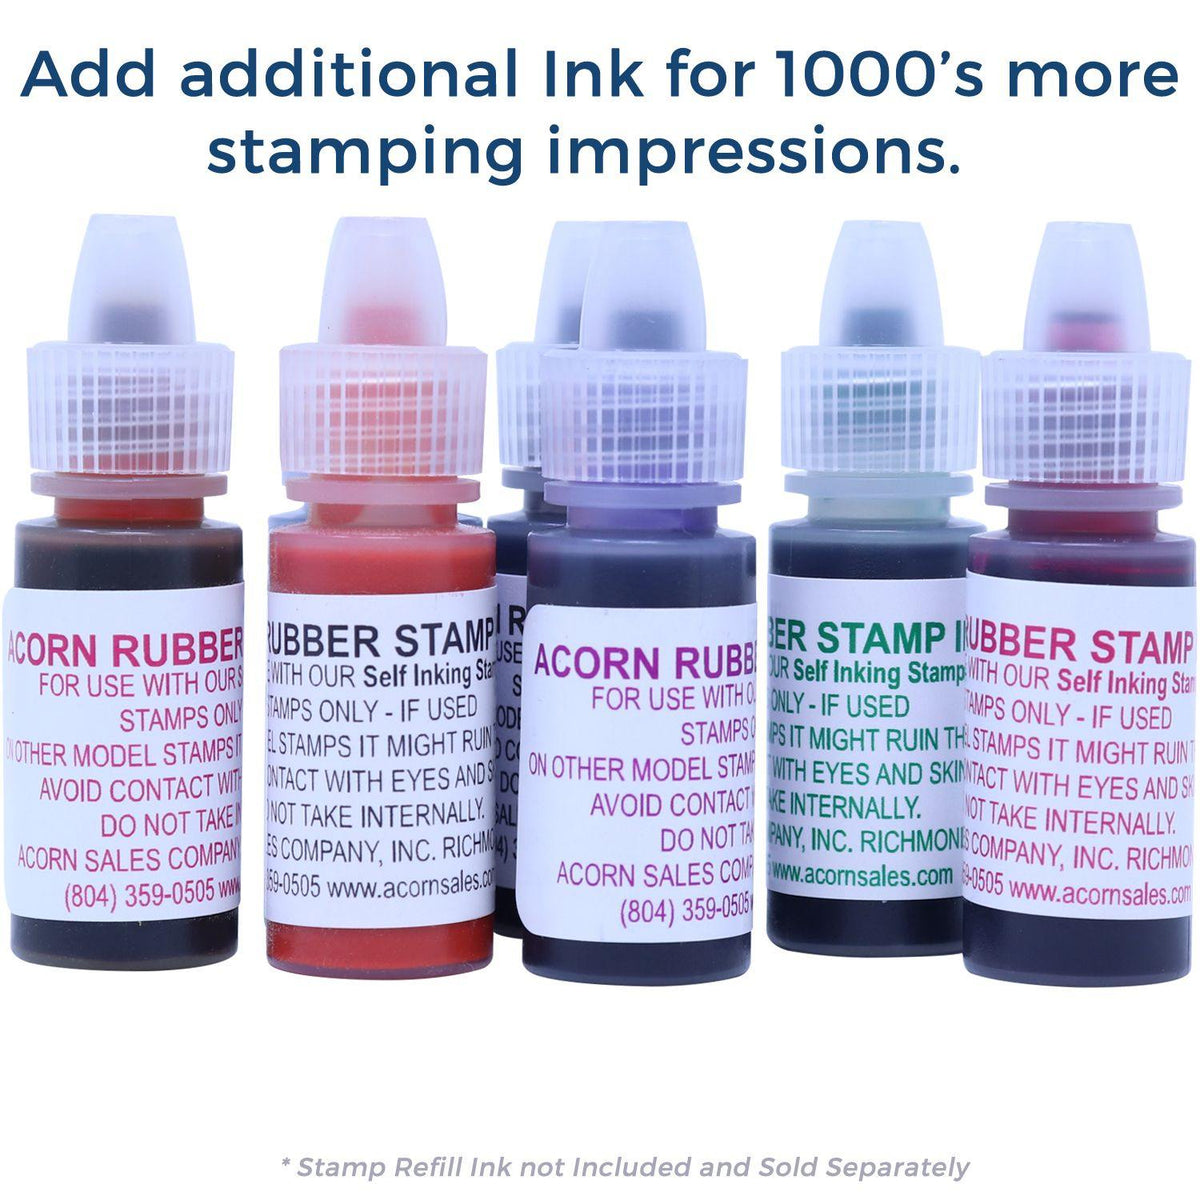 Refill Inks for Large Pre-Inked Credit Outline Stamp Available